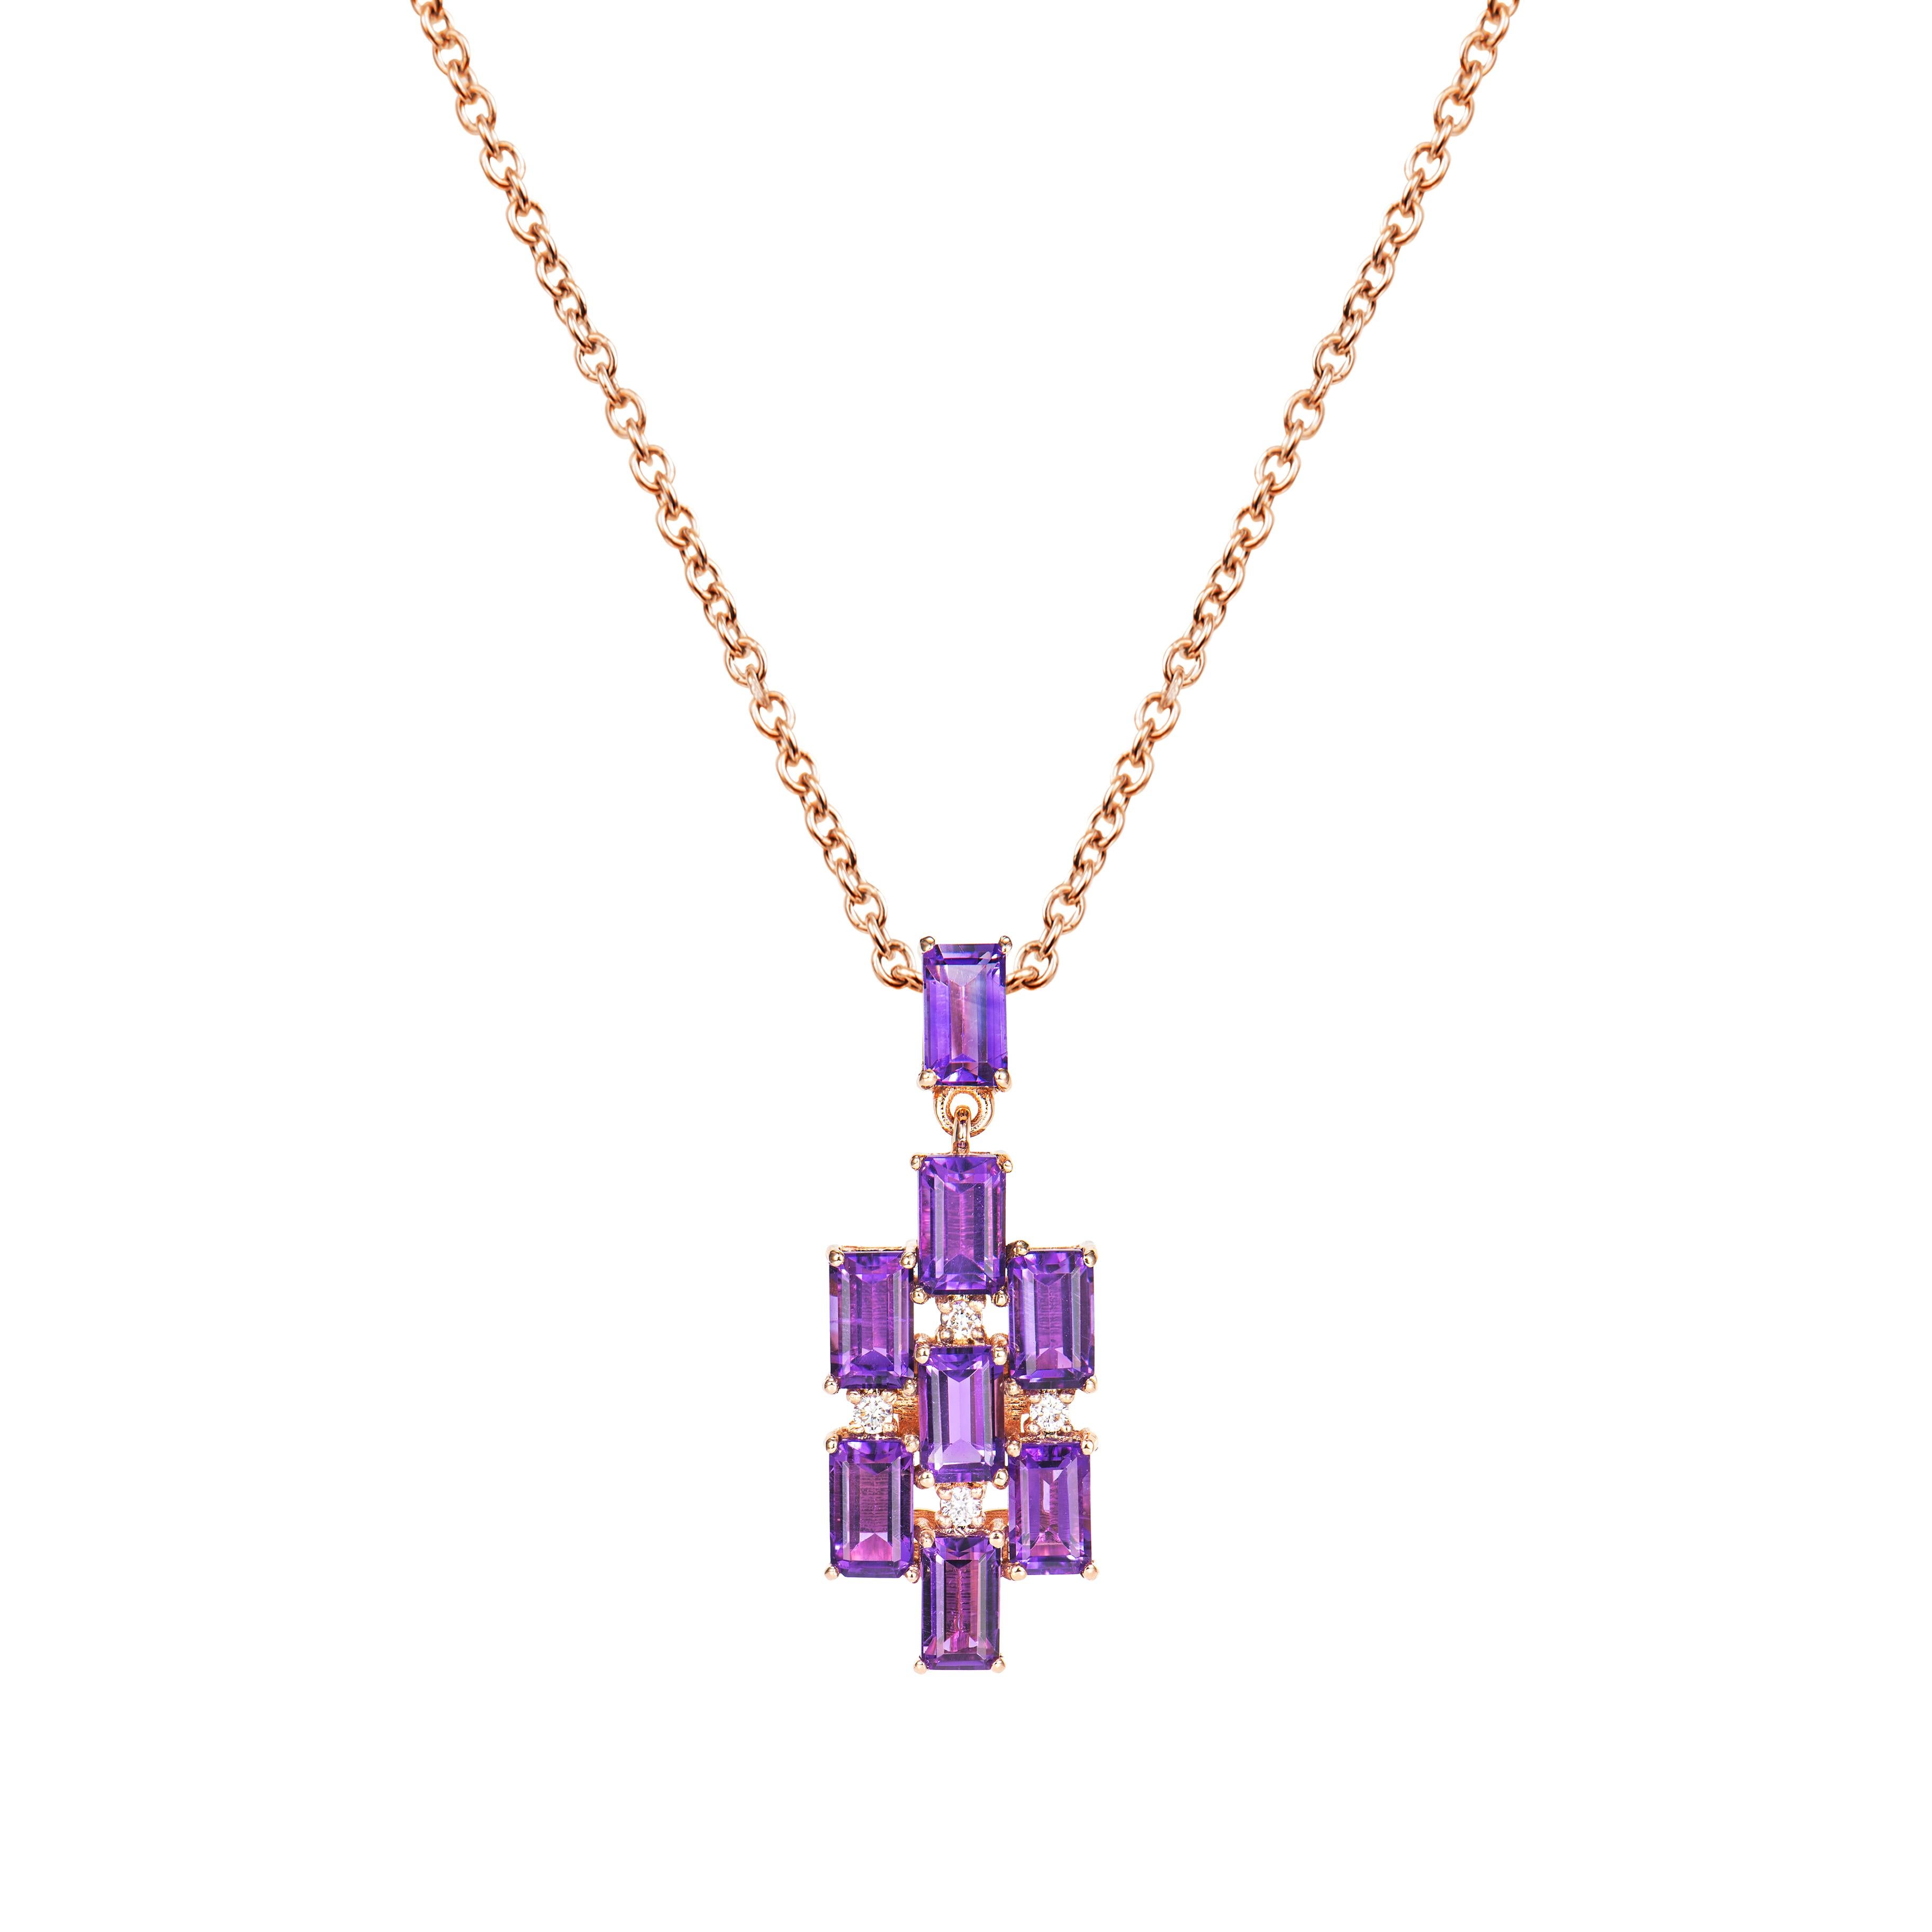 It is a fancy amethyst pendant in an octagon shape. This pendant made of precious stone has a timeless, exquisite appeal that can be worn on a variety of occasions. Materials such as amethyst, citrine, and rhodolite are suitable. One of these is a